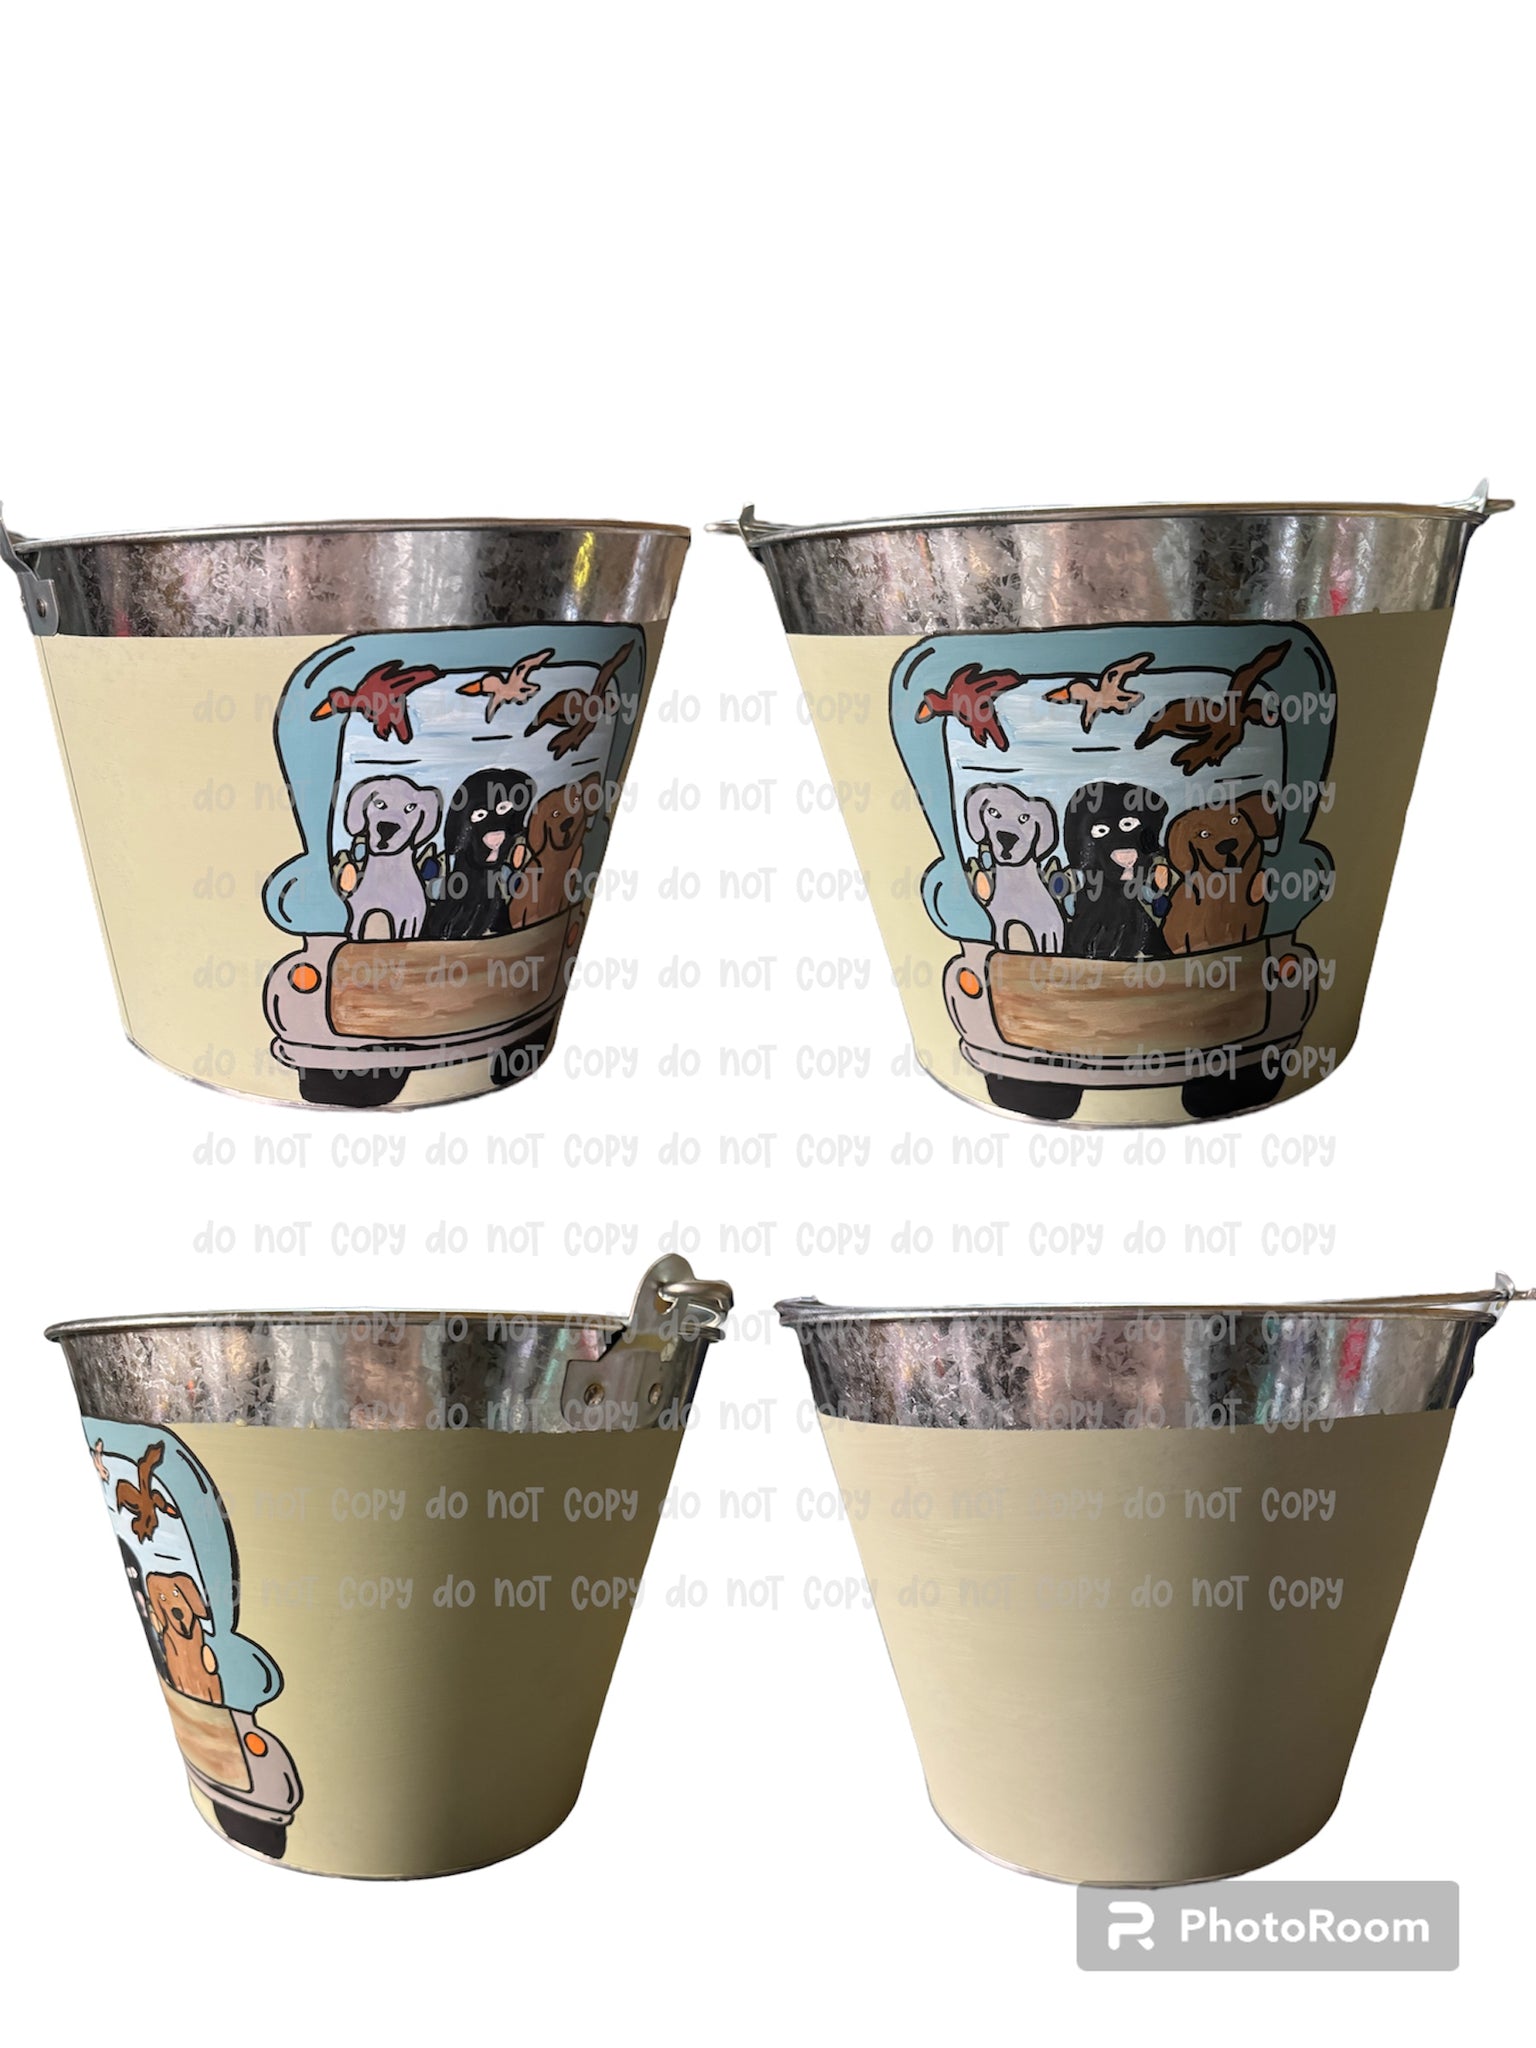 Ducks + dogs in truck w/ Easter Eggs Hand painted Easter Bucket / Pail